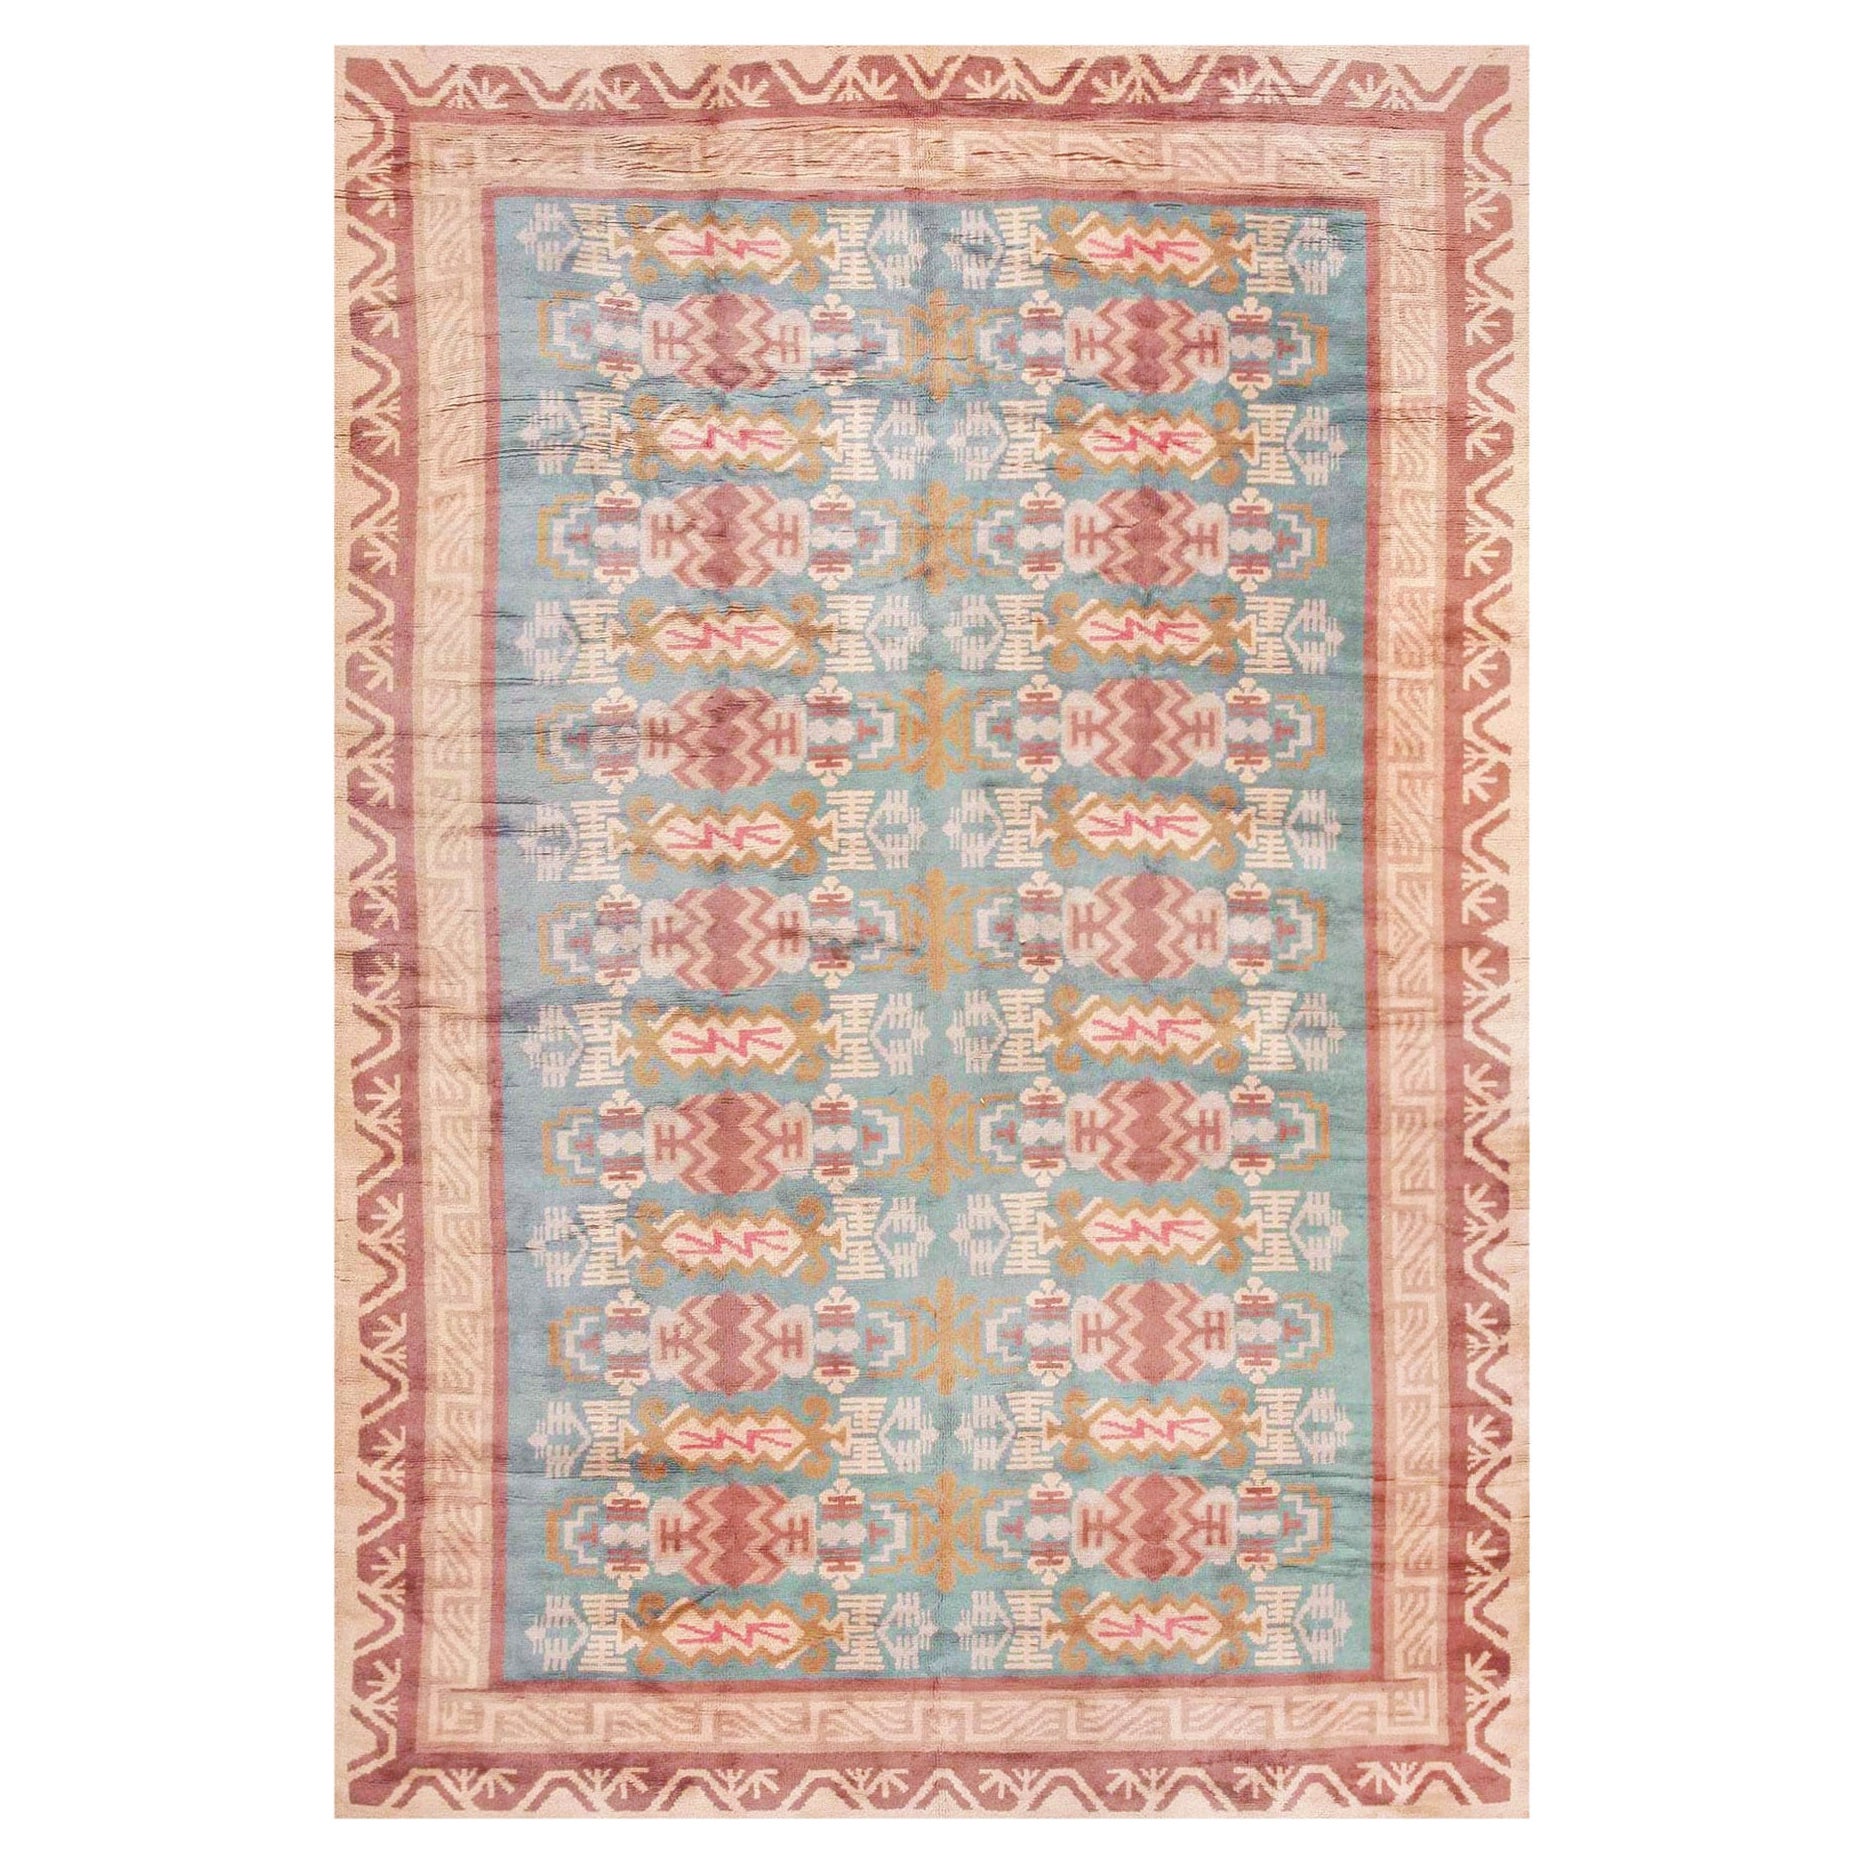 Nazmiyal Collection Vintage Scandinavian Swedish Rug. 8 ft. 6 in x 12 ft. 8 in